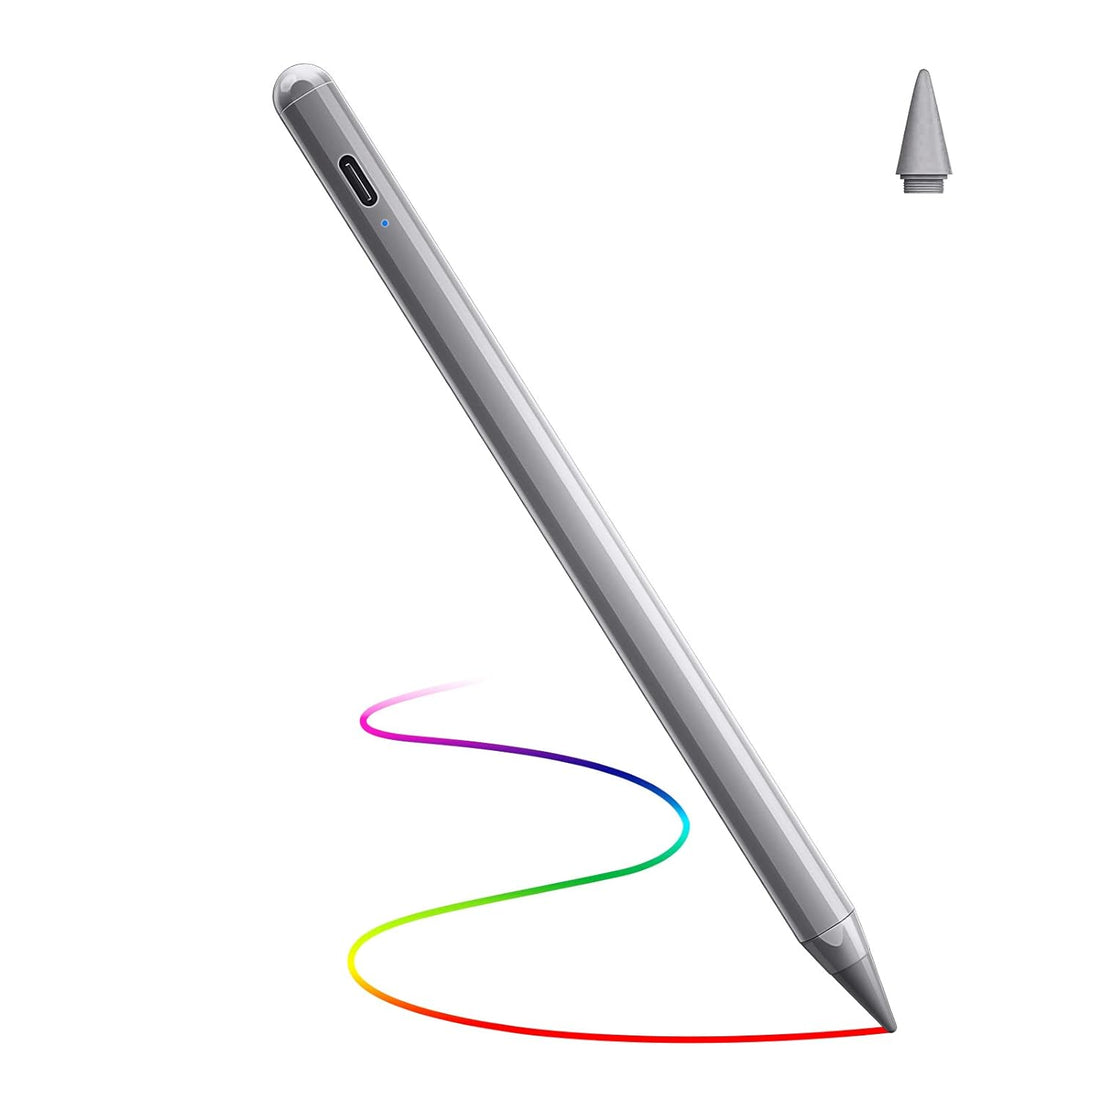 DTTO Stylus Pen for iPad, Active Pencil for (2018-2021) New Apple iPad Mini 6th/5th Gen, iPad 9th/8th/7th/6th Gen, Pro 11/12.9 Inch, iPad Air 4th/3rd Gen for Drawing/Writing with Palm Rejection (Grey)